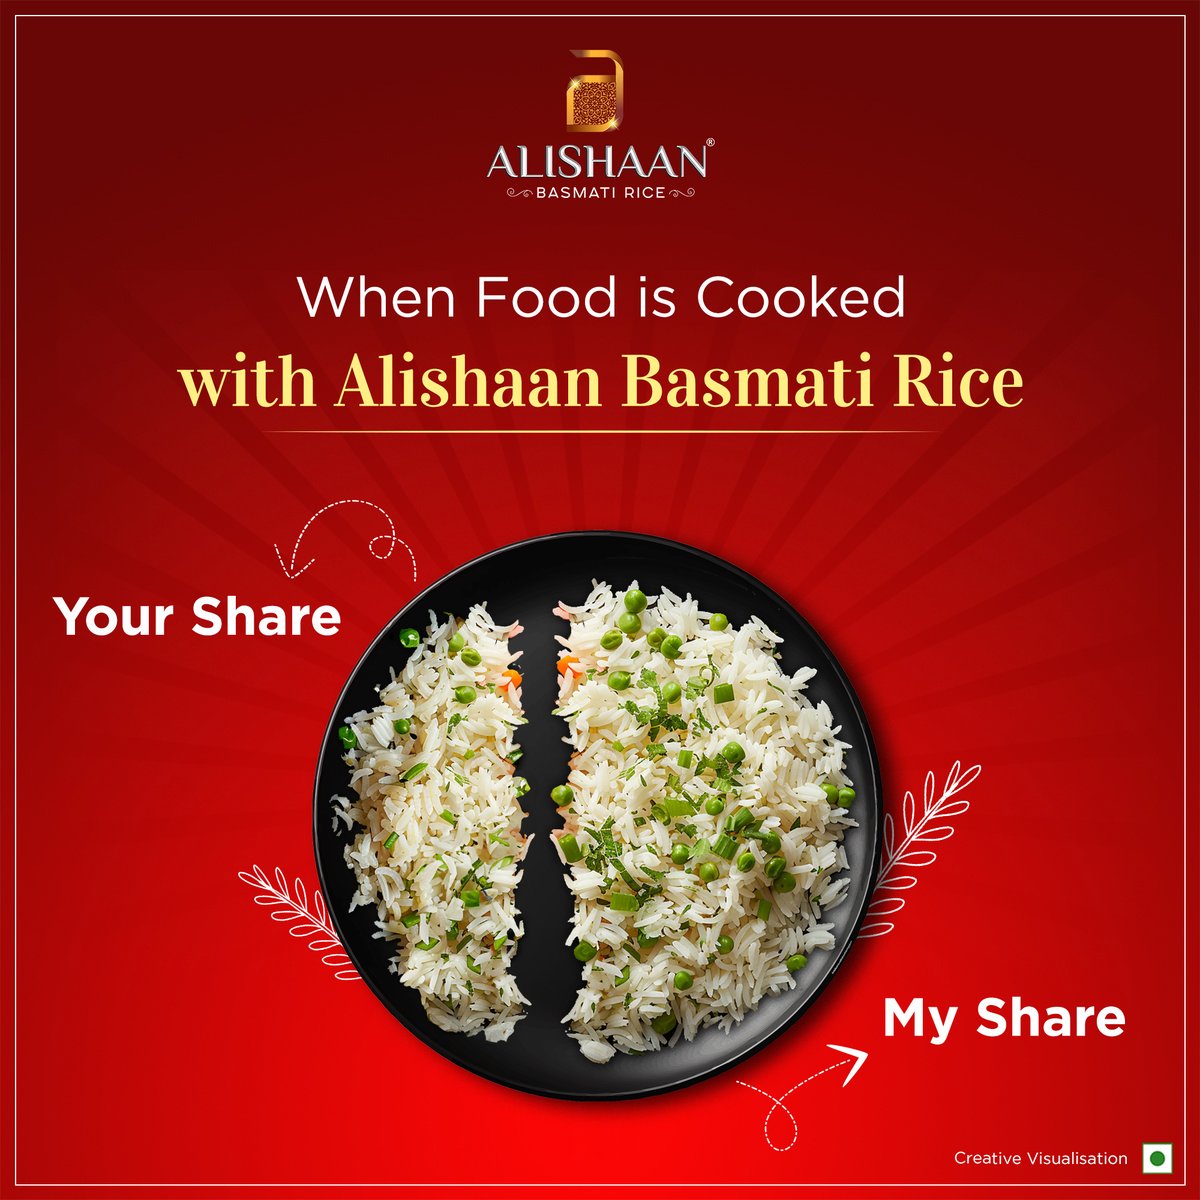 Your share is my share!

Sharing isn't always equal when it comes to Alishaan Basmati Rice, but love always is.

#SharingIsCaring #LoveOnThePlate #AlishaanBasmati #Alishaan #AlishaanBasmatiRice #Rice #AromaticRice #RiceLovers #FoodLovers #Food #Basmati #LongGrainRice #FinestRice